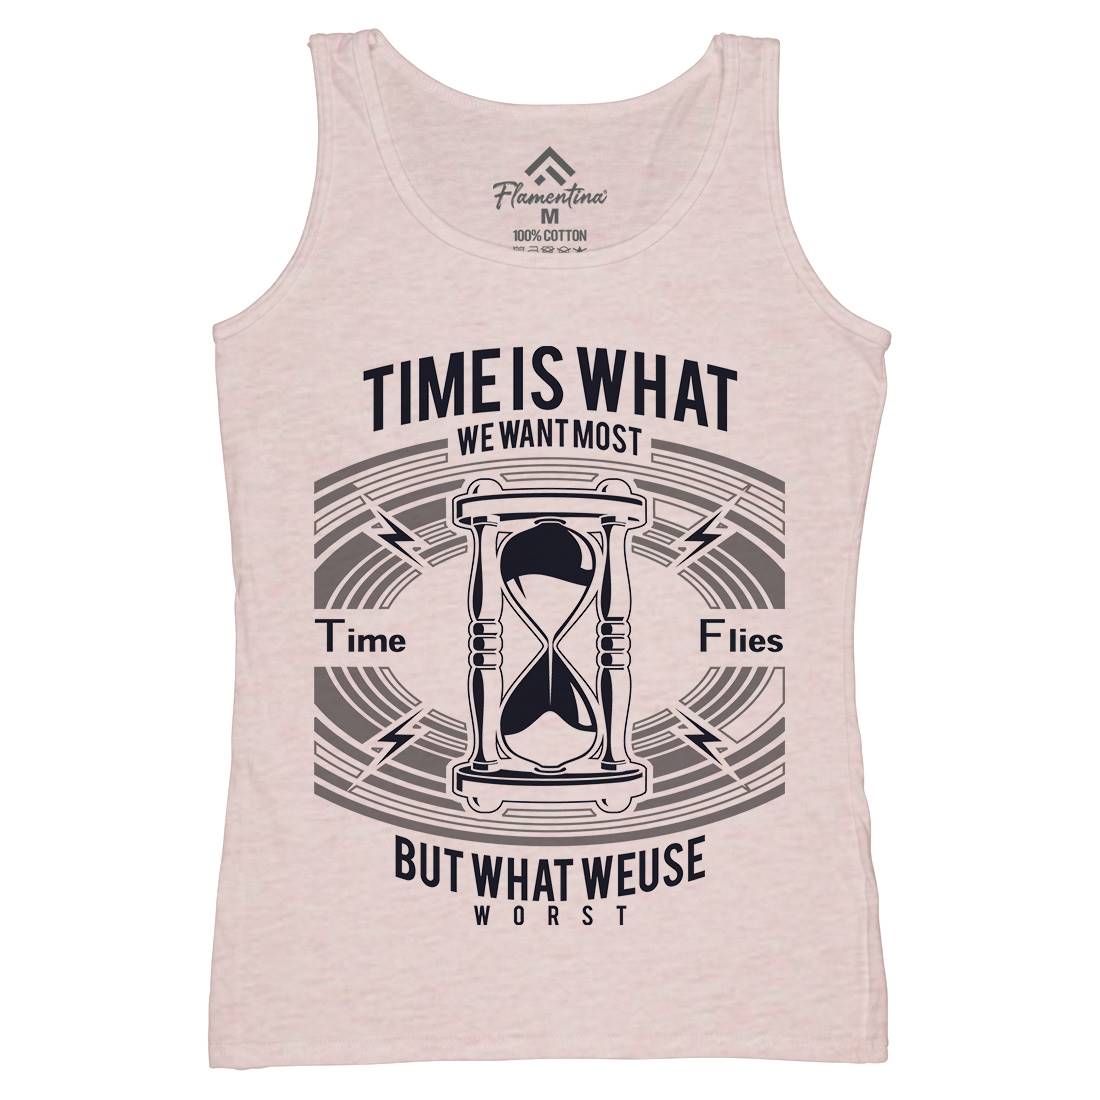 Time Womens Organic Tank Top Vest Quotes A178